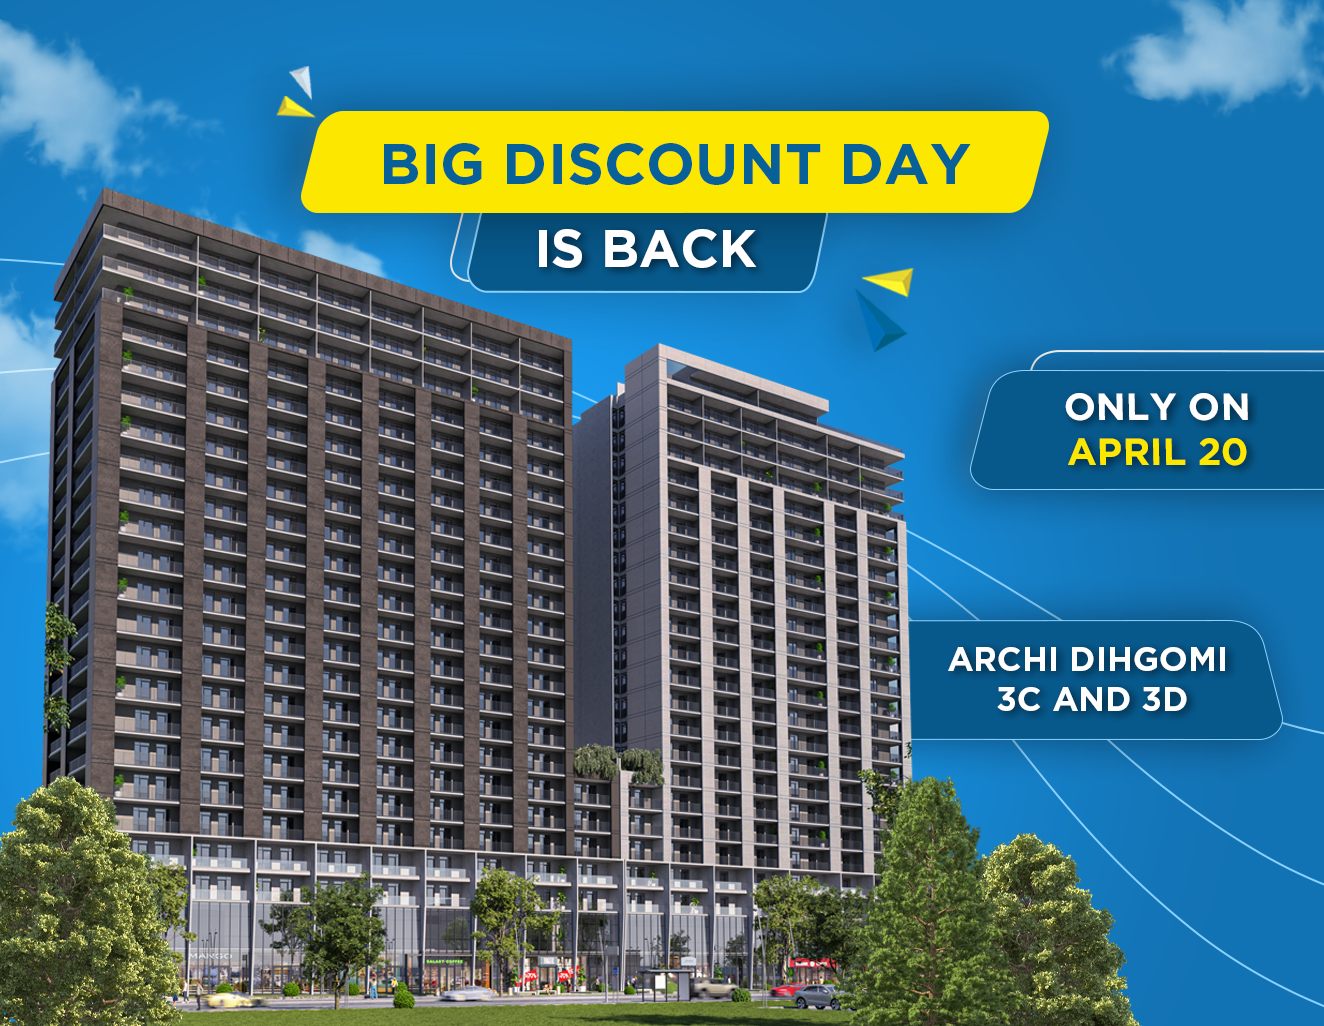 Big Discount Day is coming back at Archi